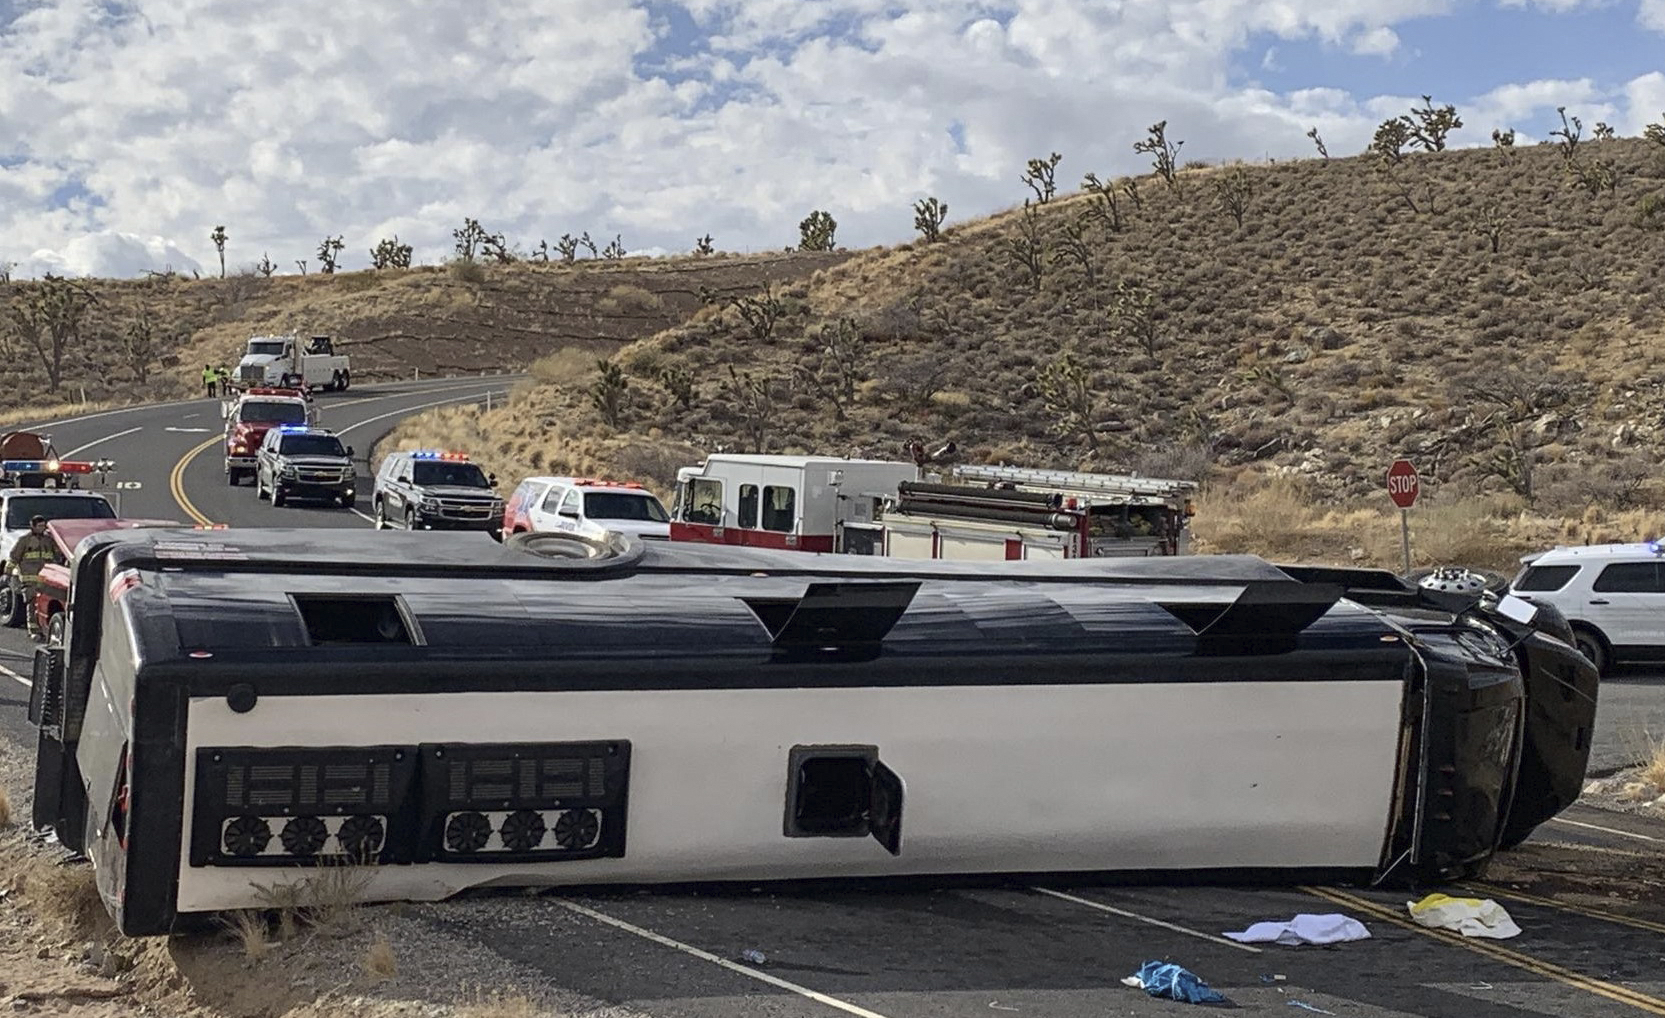 One Dead, Dozens Injured After Bus Crash on Way to Grand Canyon